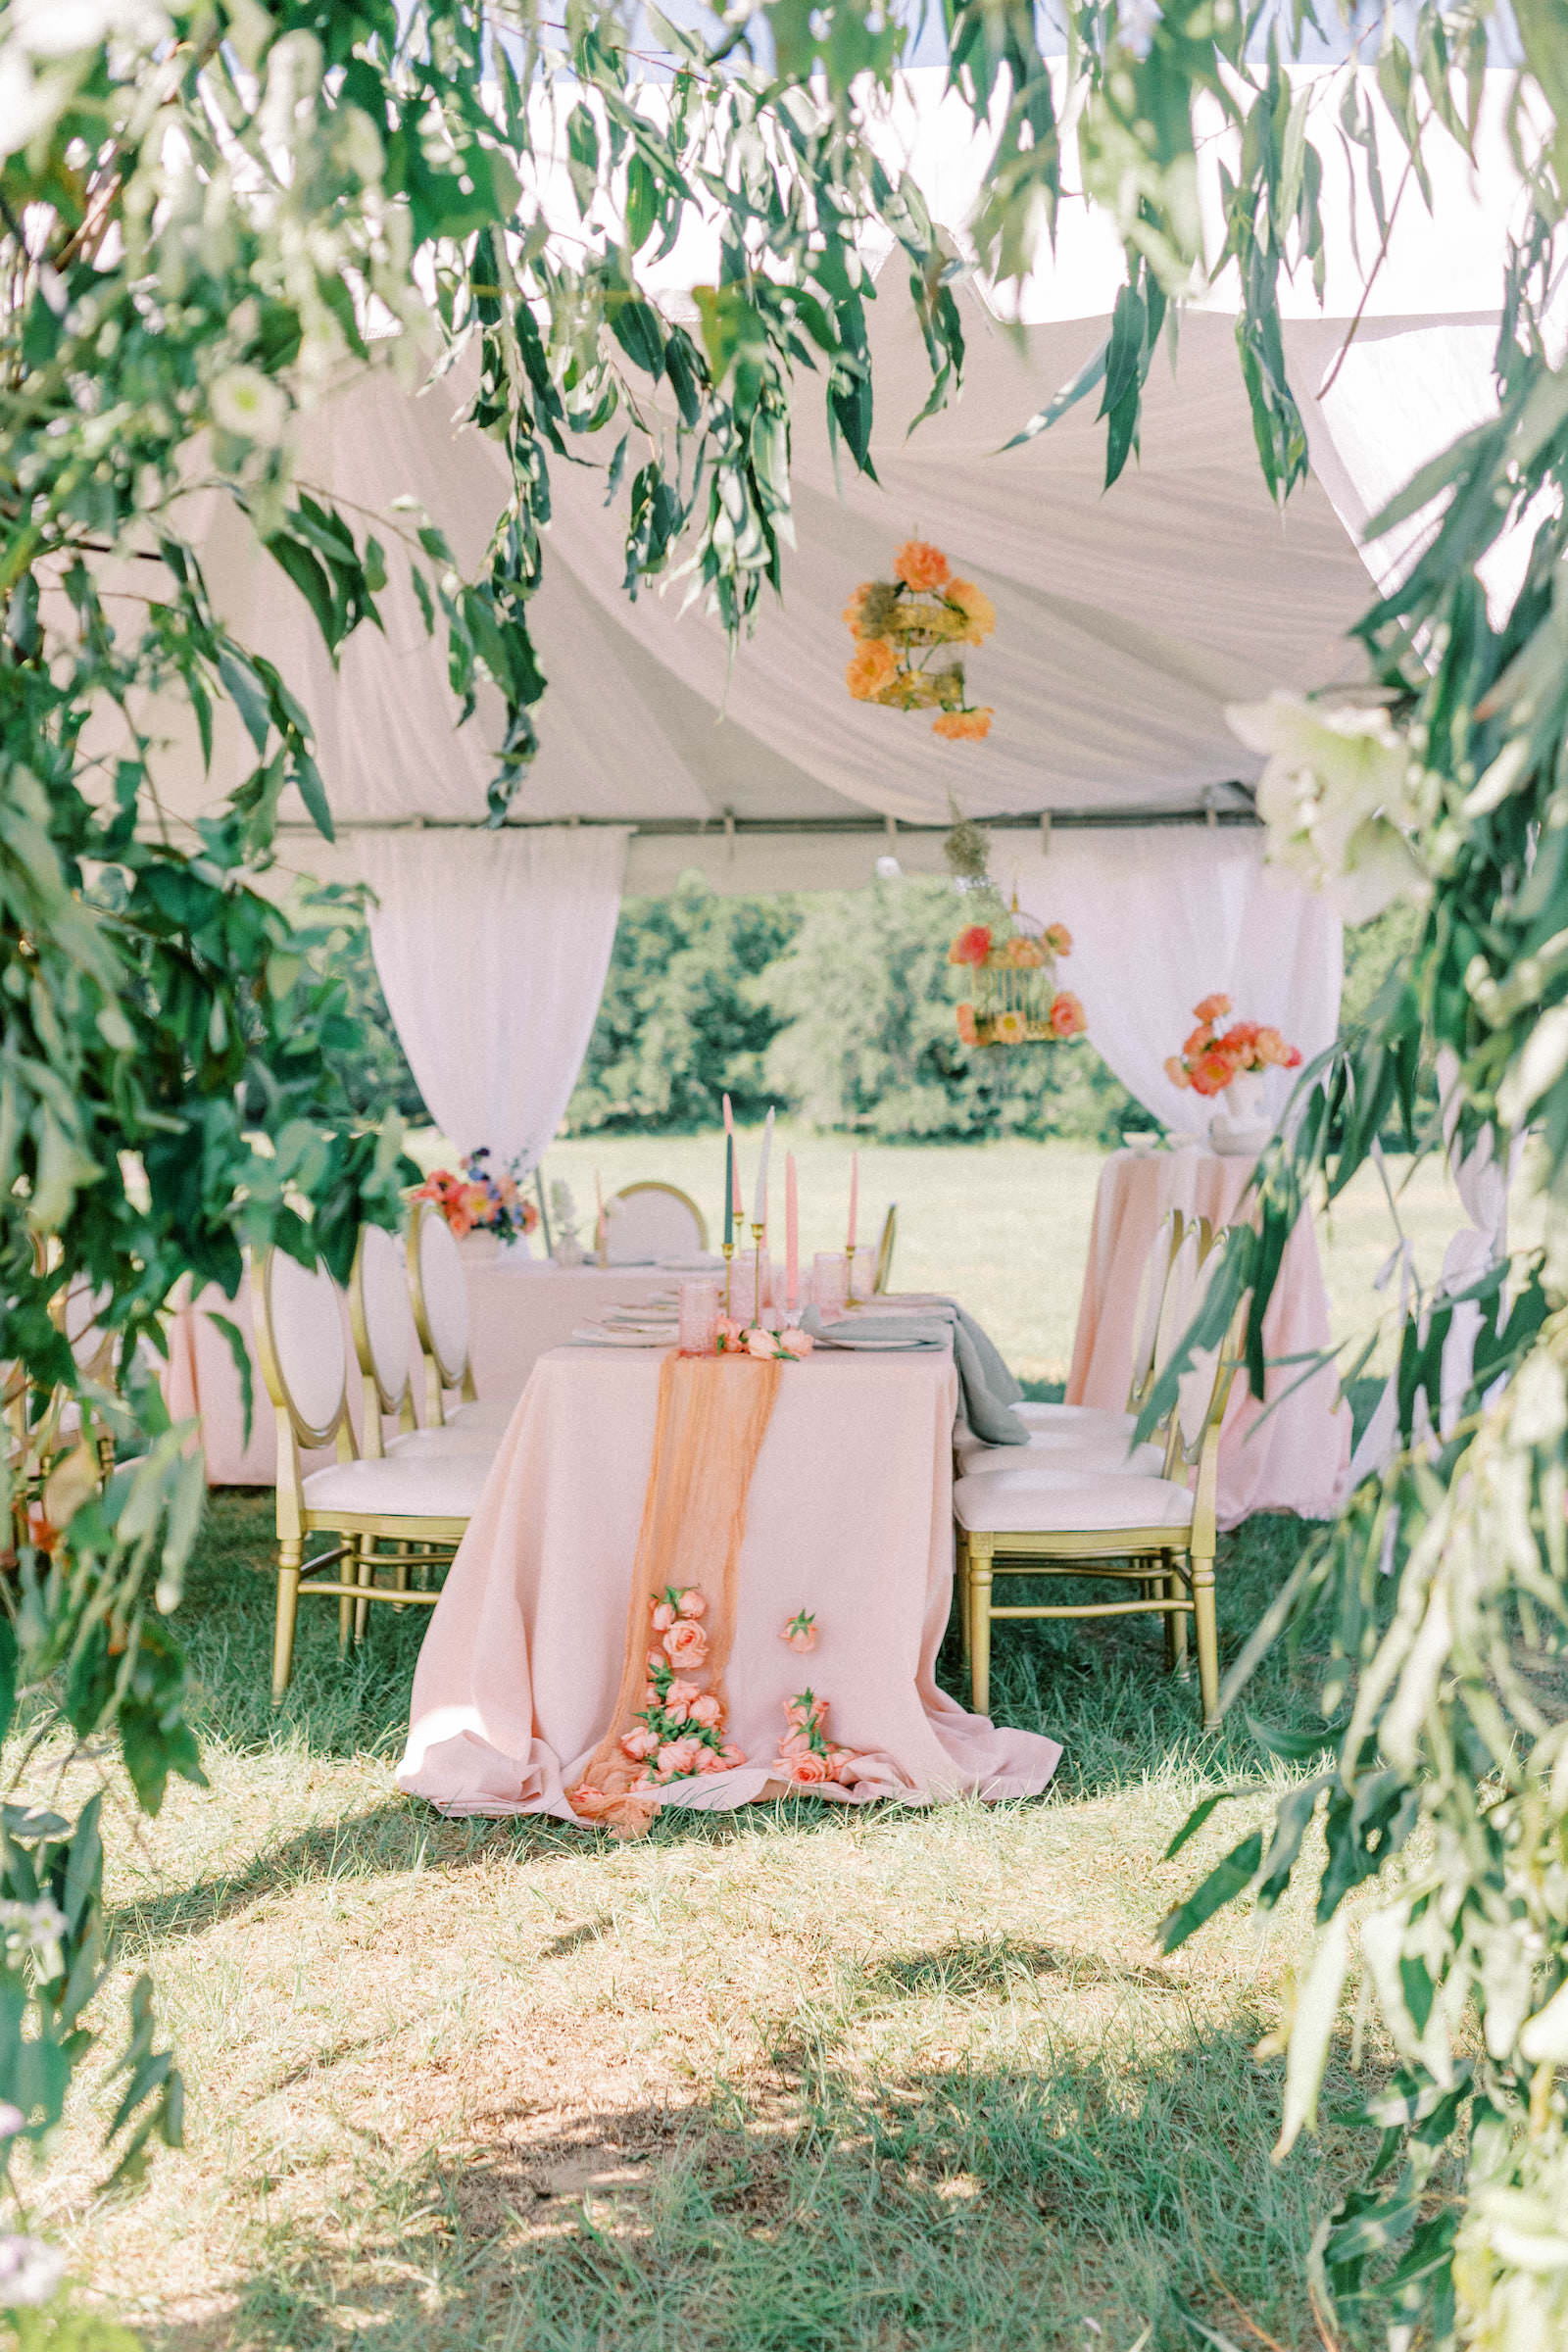 Garden Whimsical Wedding Decor, White Tent, Table with Blush Pink Table Linen, Coral Cheese Cloth Table Runner, Hanging Orange Flower Bouquets, Louis Chairs | Outdoor Nature Tampa Bay Wedding Venue Mill Pond Estate | Wedding Chair Rental Kate Ryan Event Rentals